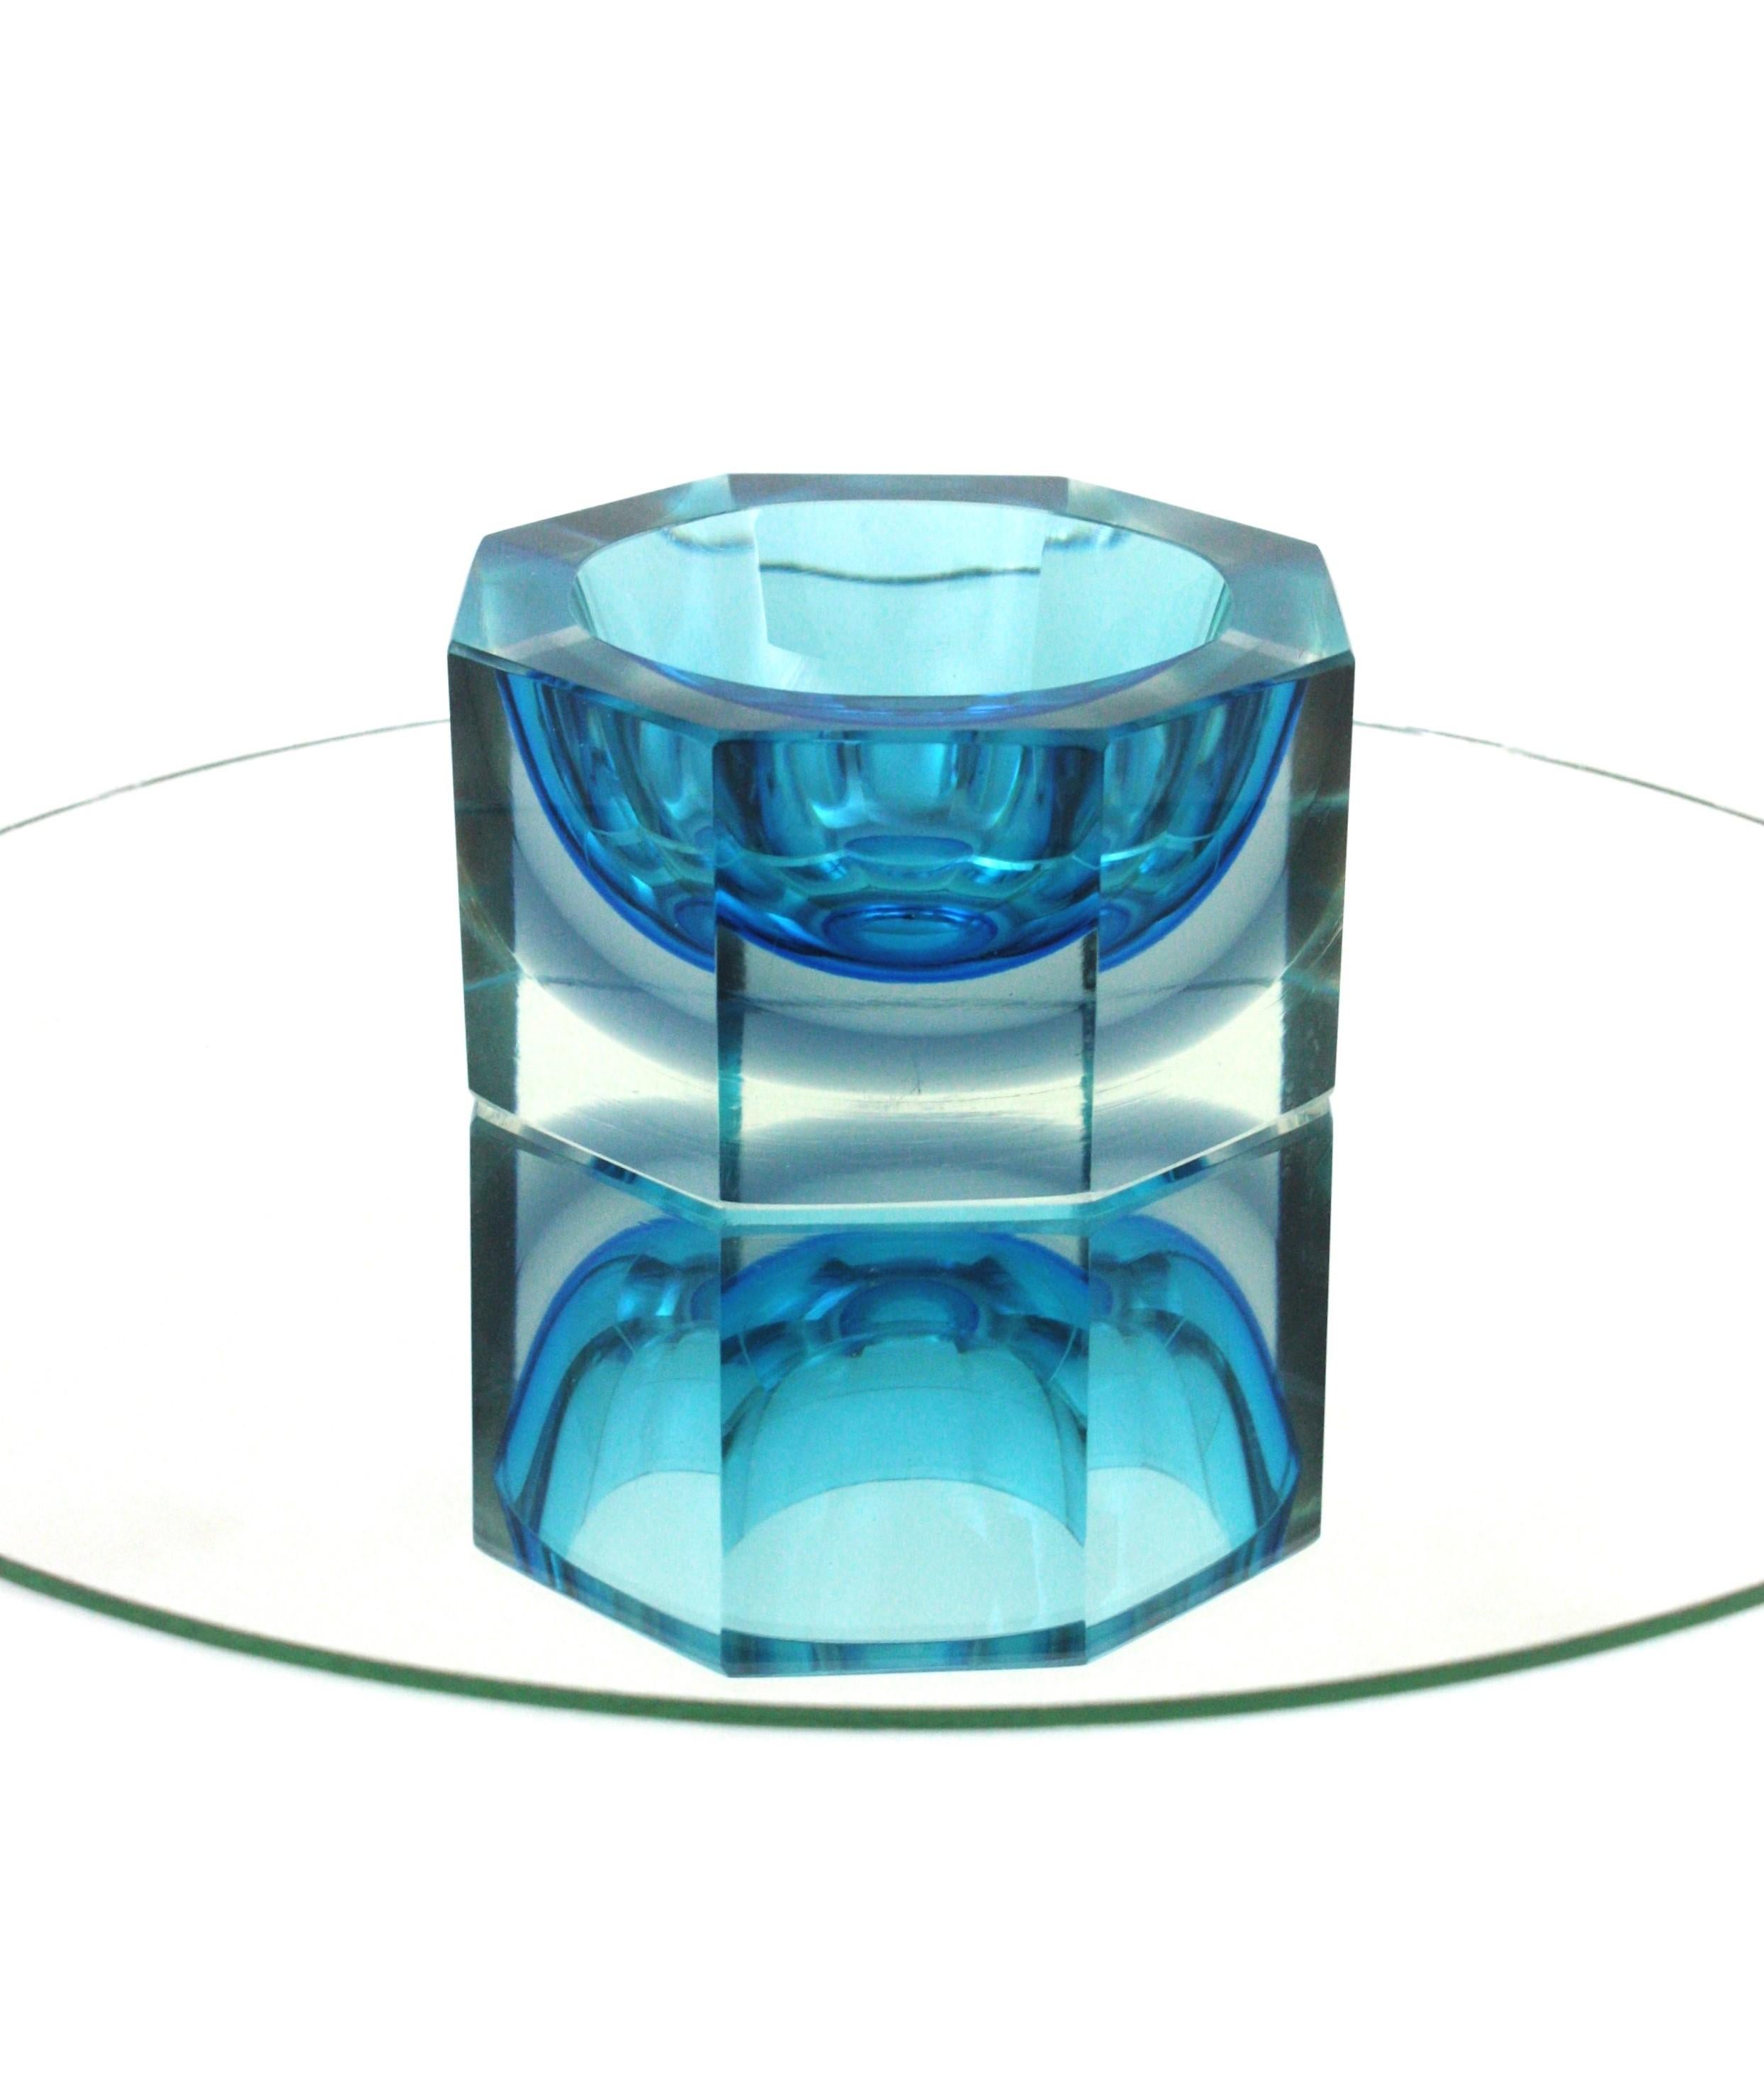 Mid-Century Modern Flavio Poli Seguso Murano Sommerso Blue & Clear Faceted Art Glass Bowl For Sale